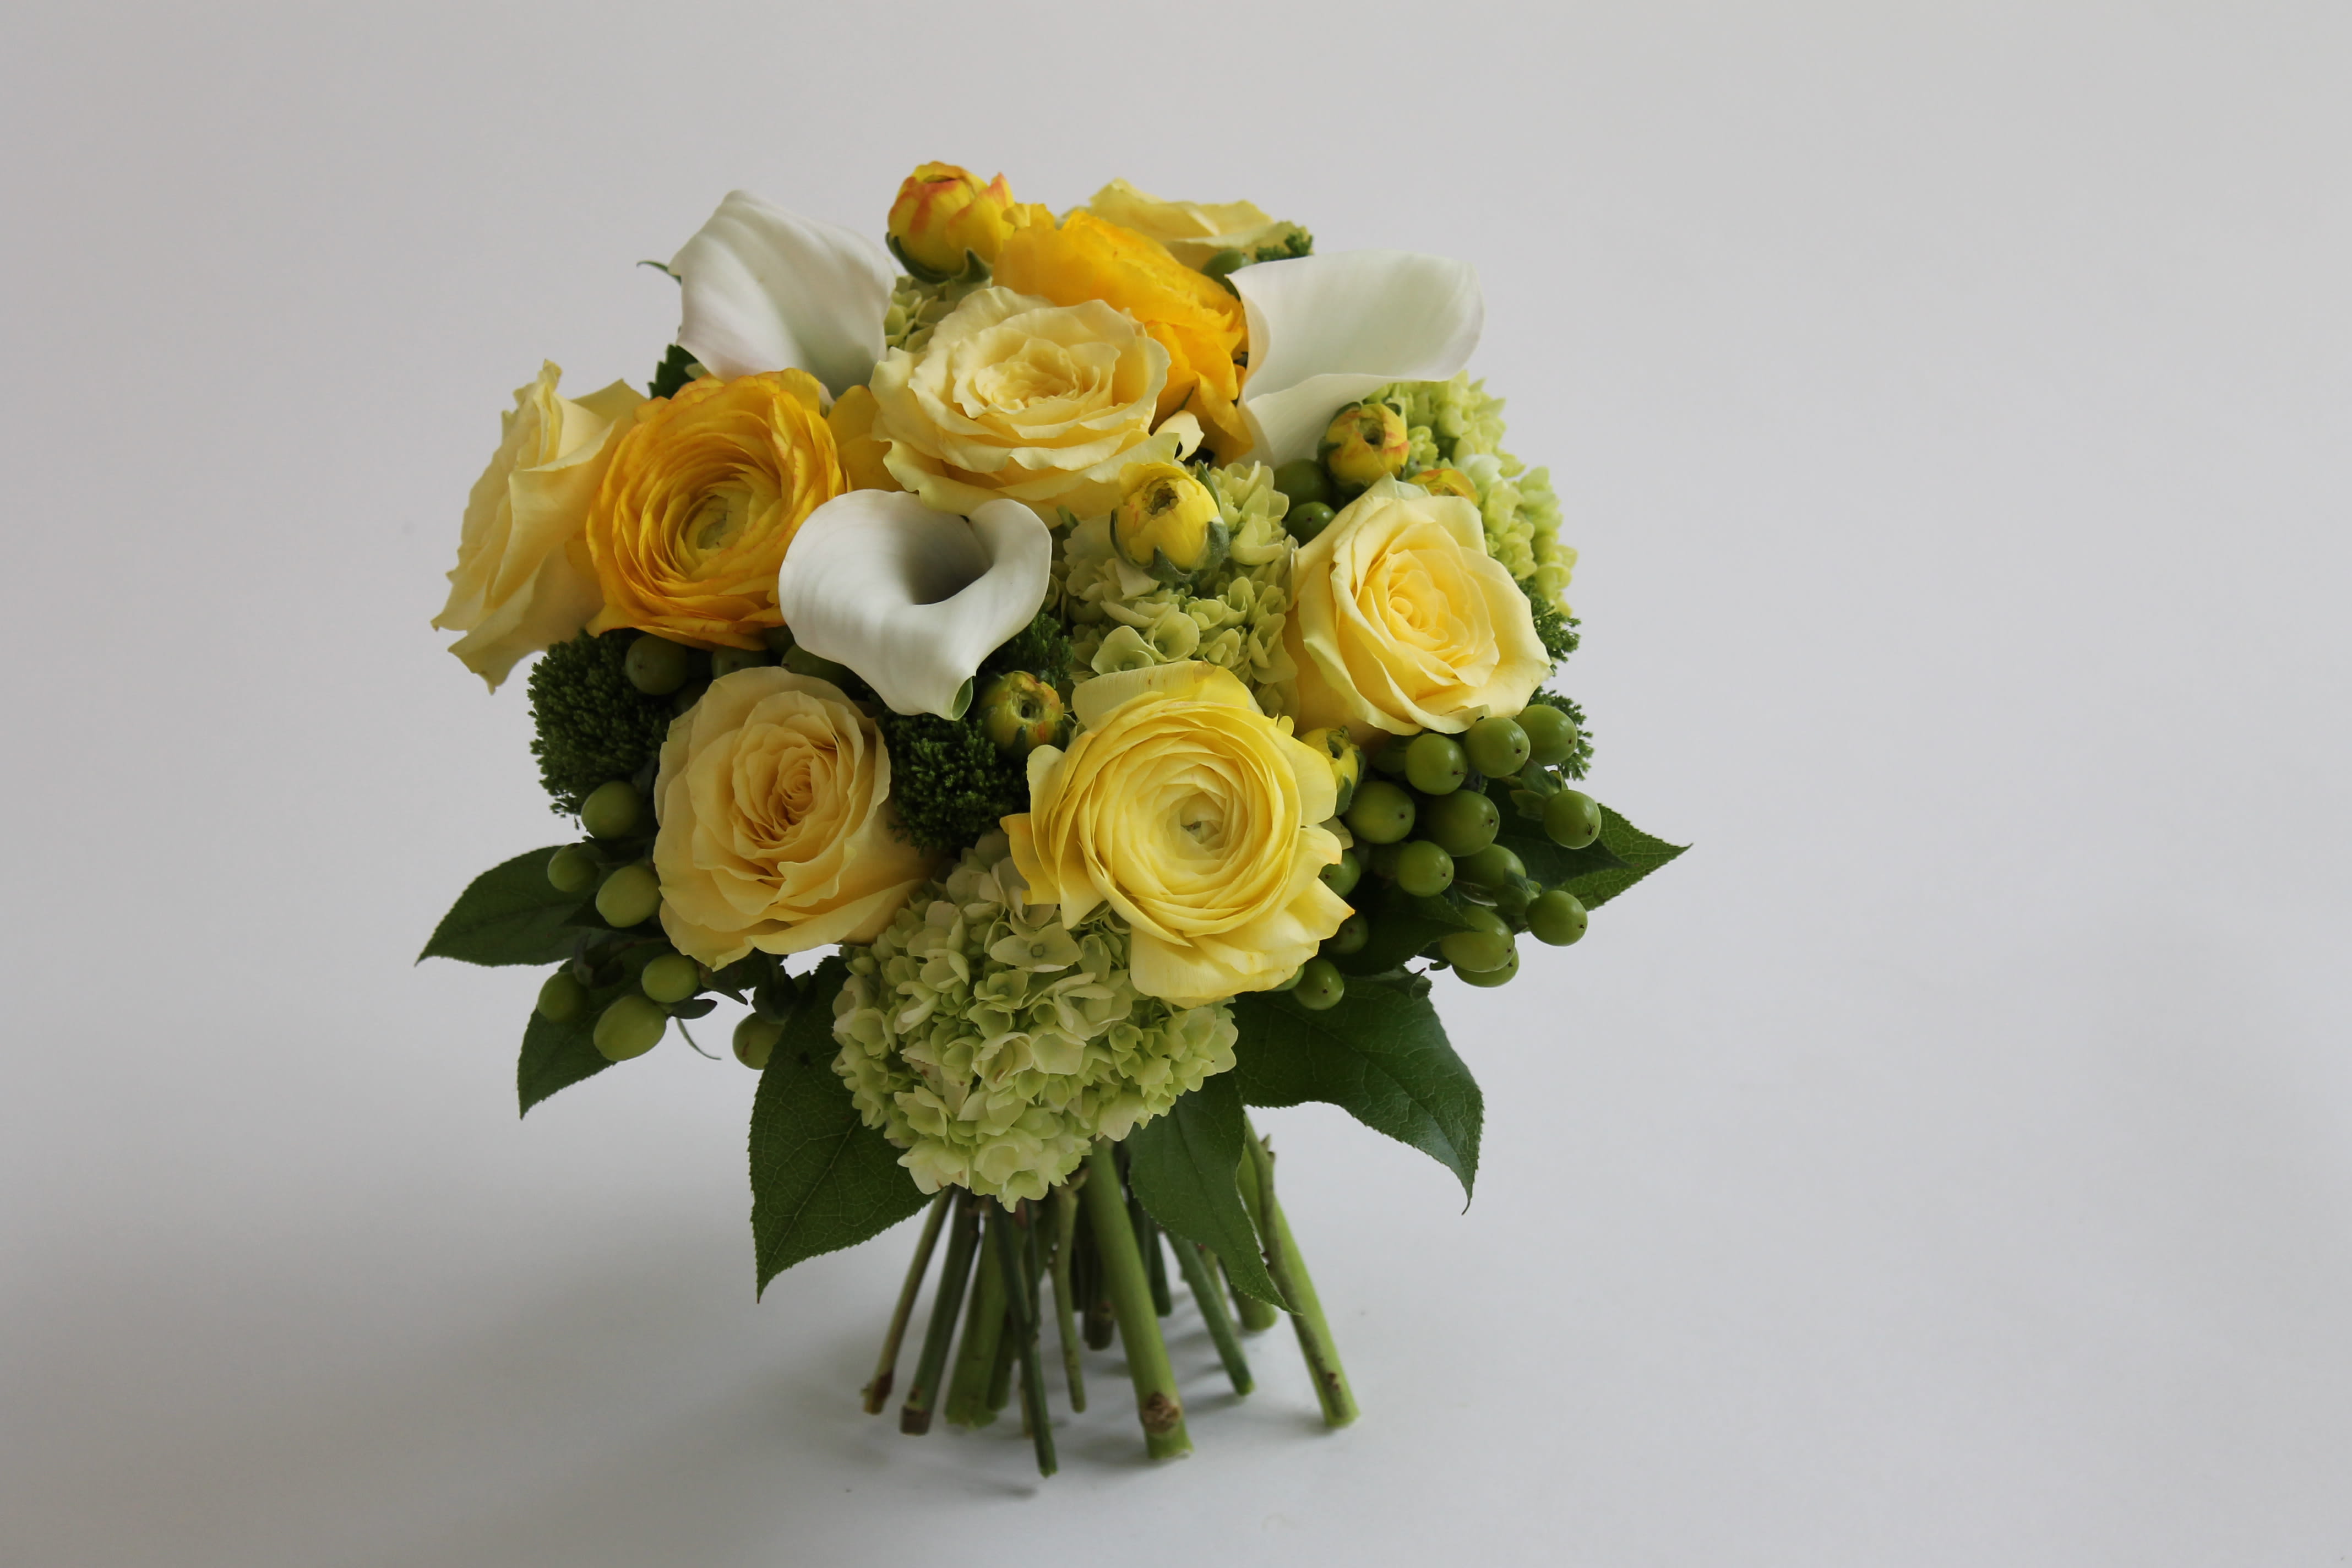 Lemon Zest - If you want to brighten someone's day this bouquet is sure to do the trick.  When this cheery combination of yellow roses, ranunculus, white mini callas and hydrangea is received smiles will abound! 